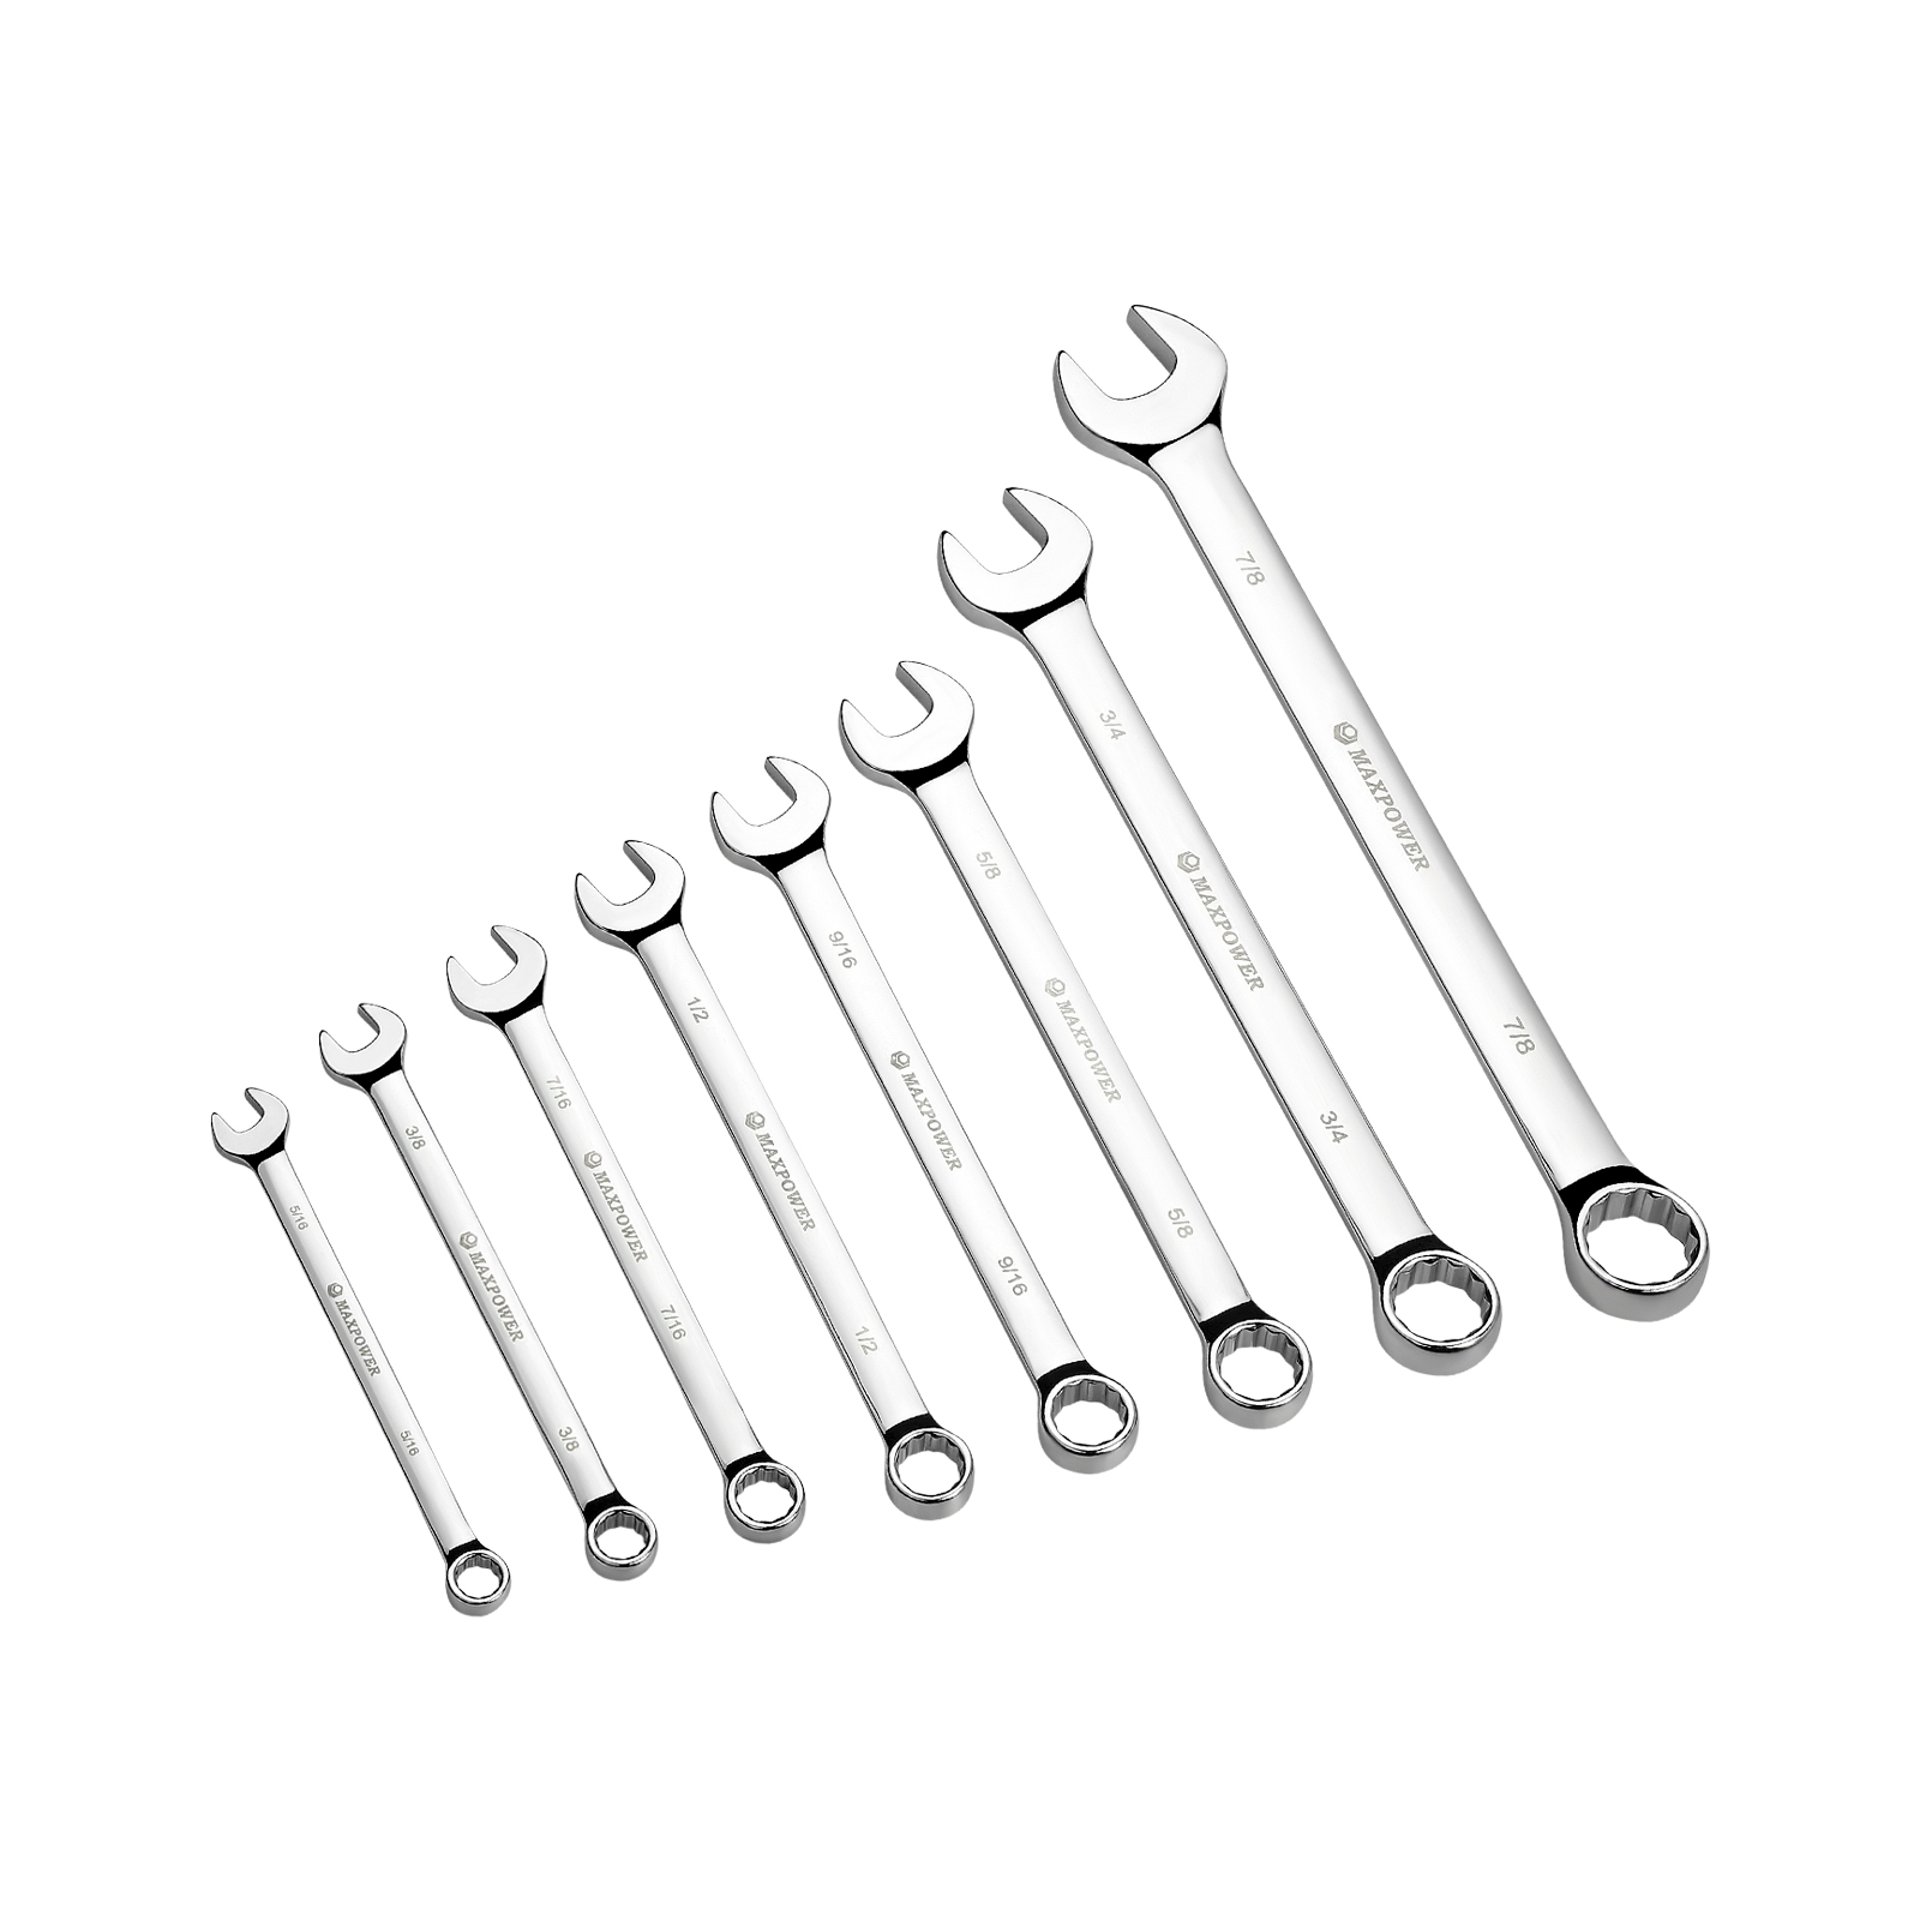 MAXPOWER 8-piece SAE Combination Wrench Set